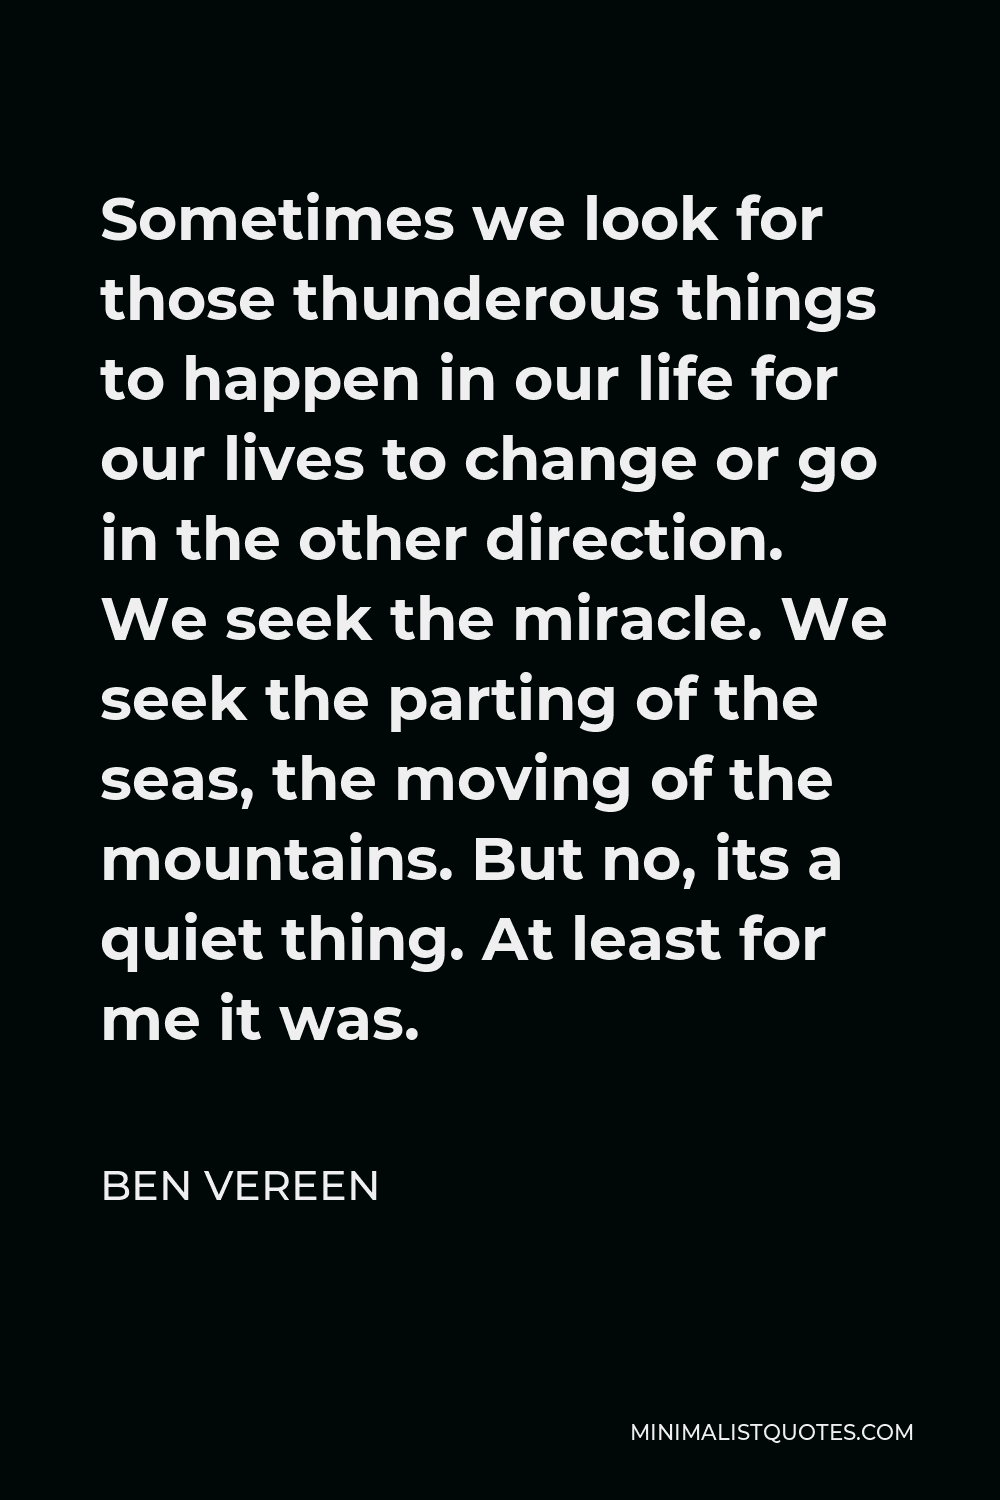 Ben Vereen Quote - Sometimes we look for those thunderous things to happen in our life for our lives to change or go in the other direction. We seek the miracle. We seek the parting of the seas, the moving of the mountains. But no, its a quiet thing. At least for me it was.